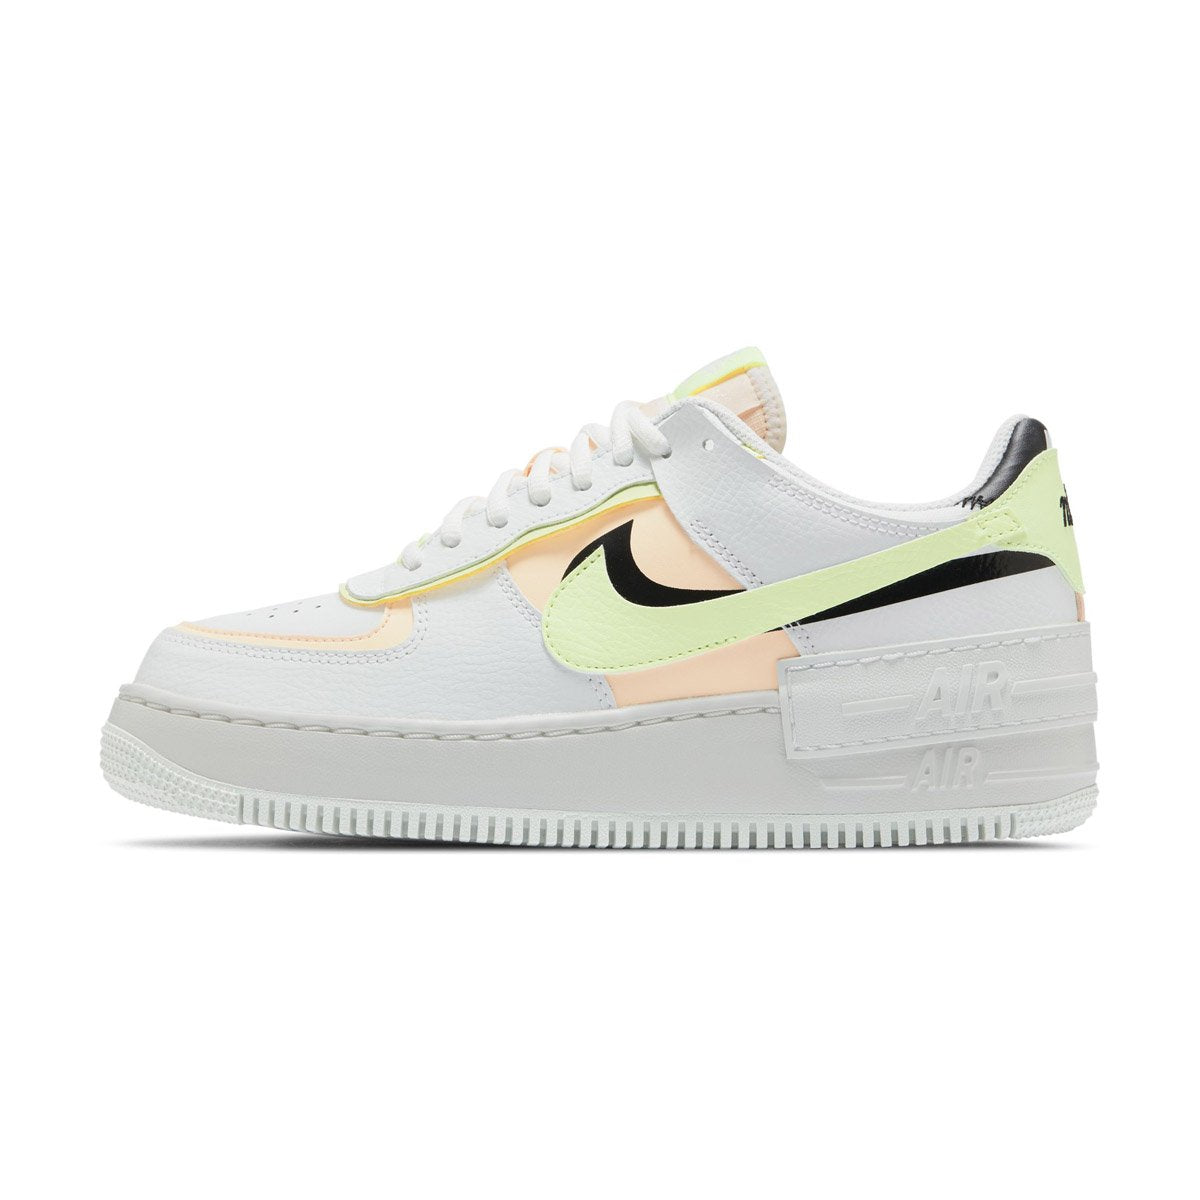 LV Colour changing AF1s  Cute nike shoes, White nike shoes